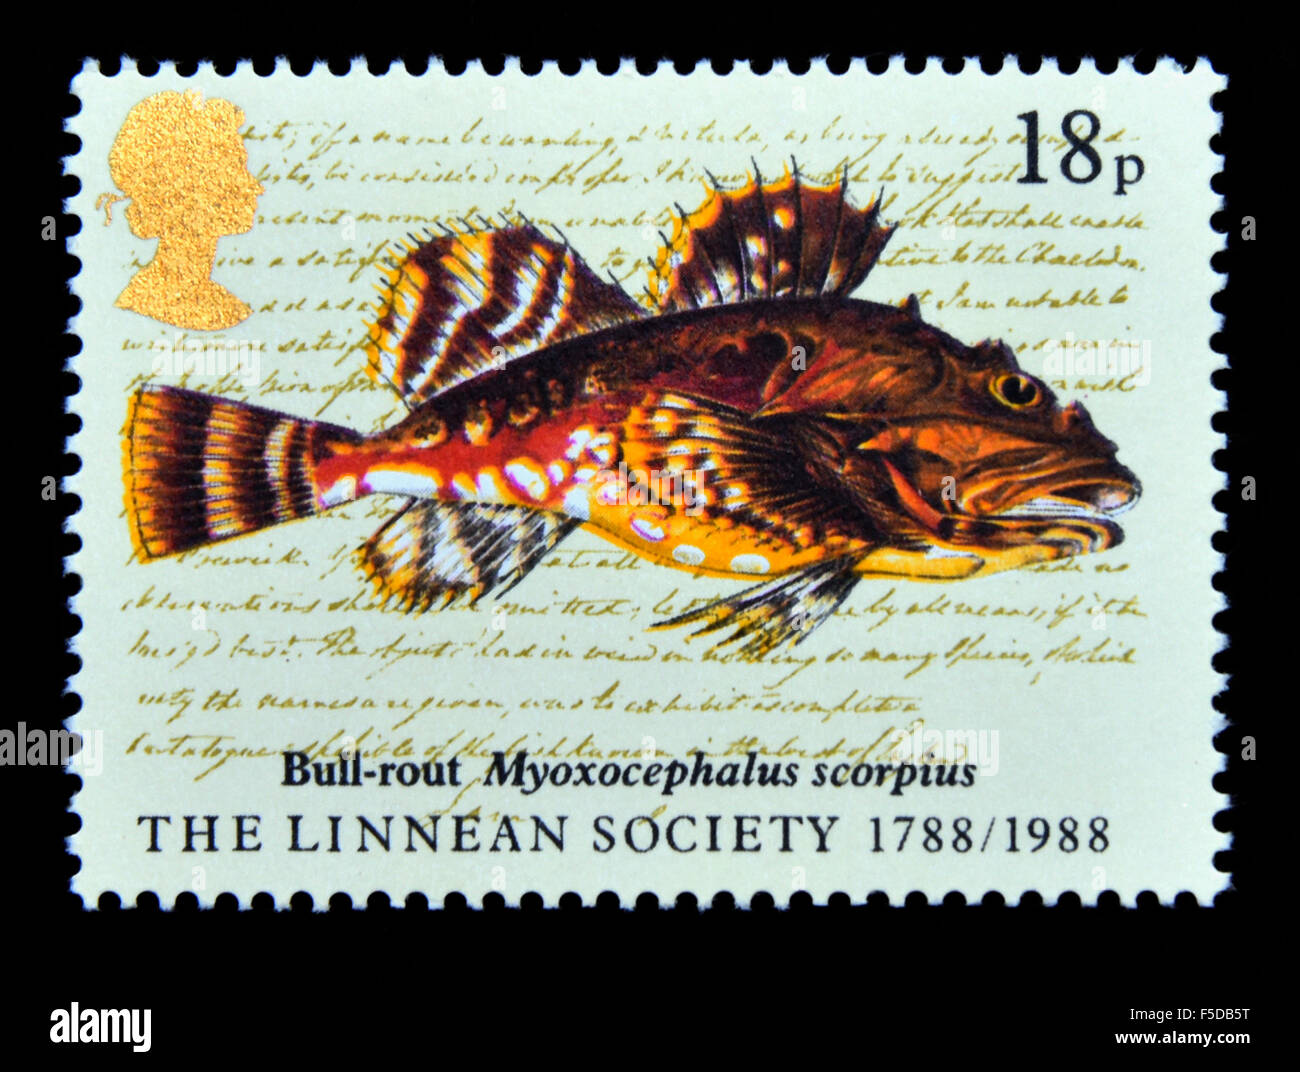 Postage stamp. Great Britain. Queen Elizabeth II. 1988. Bicentenary of Linnean Society. 1788/1988. Archive illustrations. 18p. Stock Photo